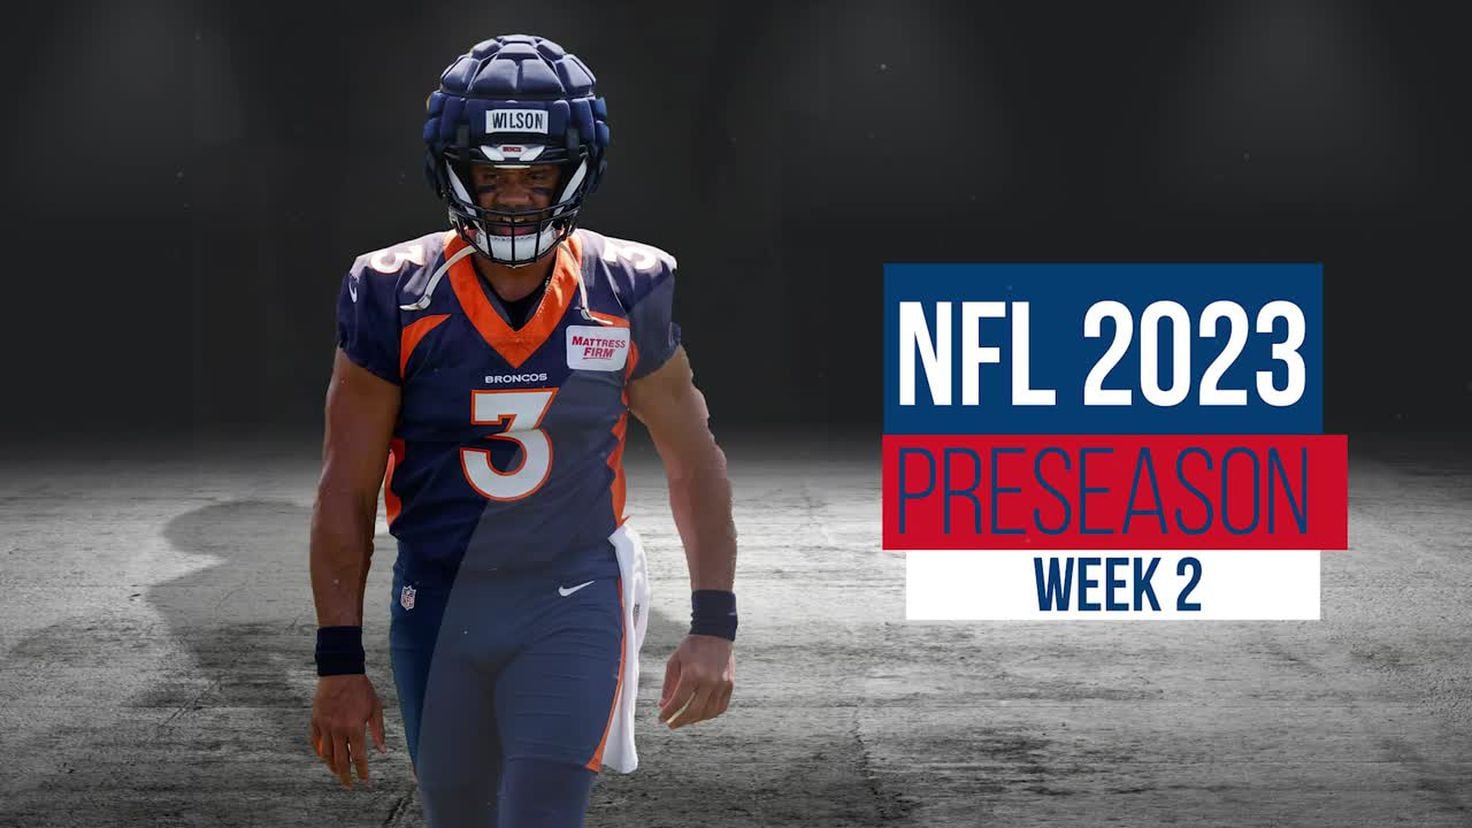 week 2 schedule for the nfl